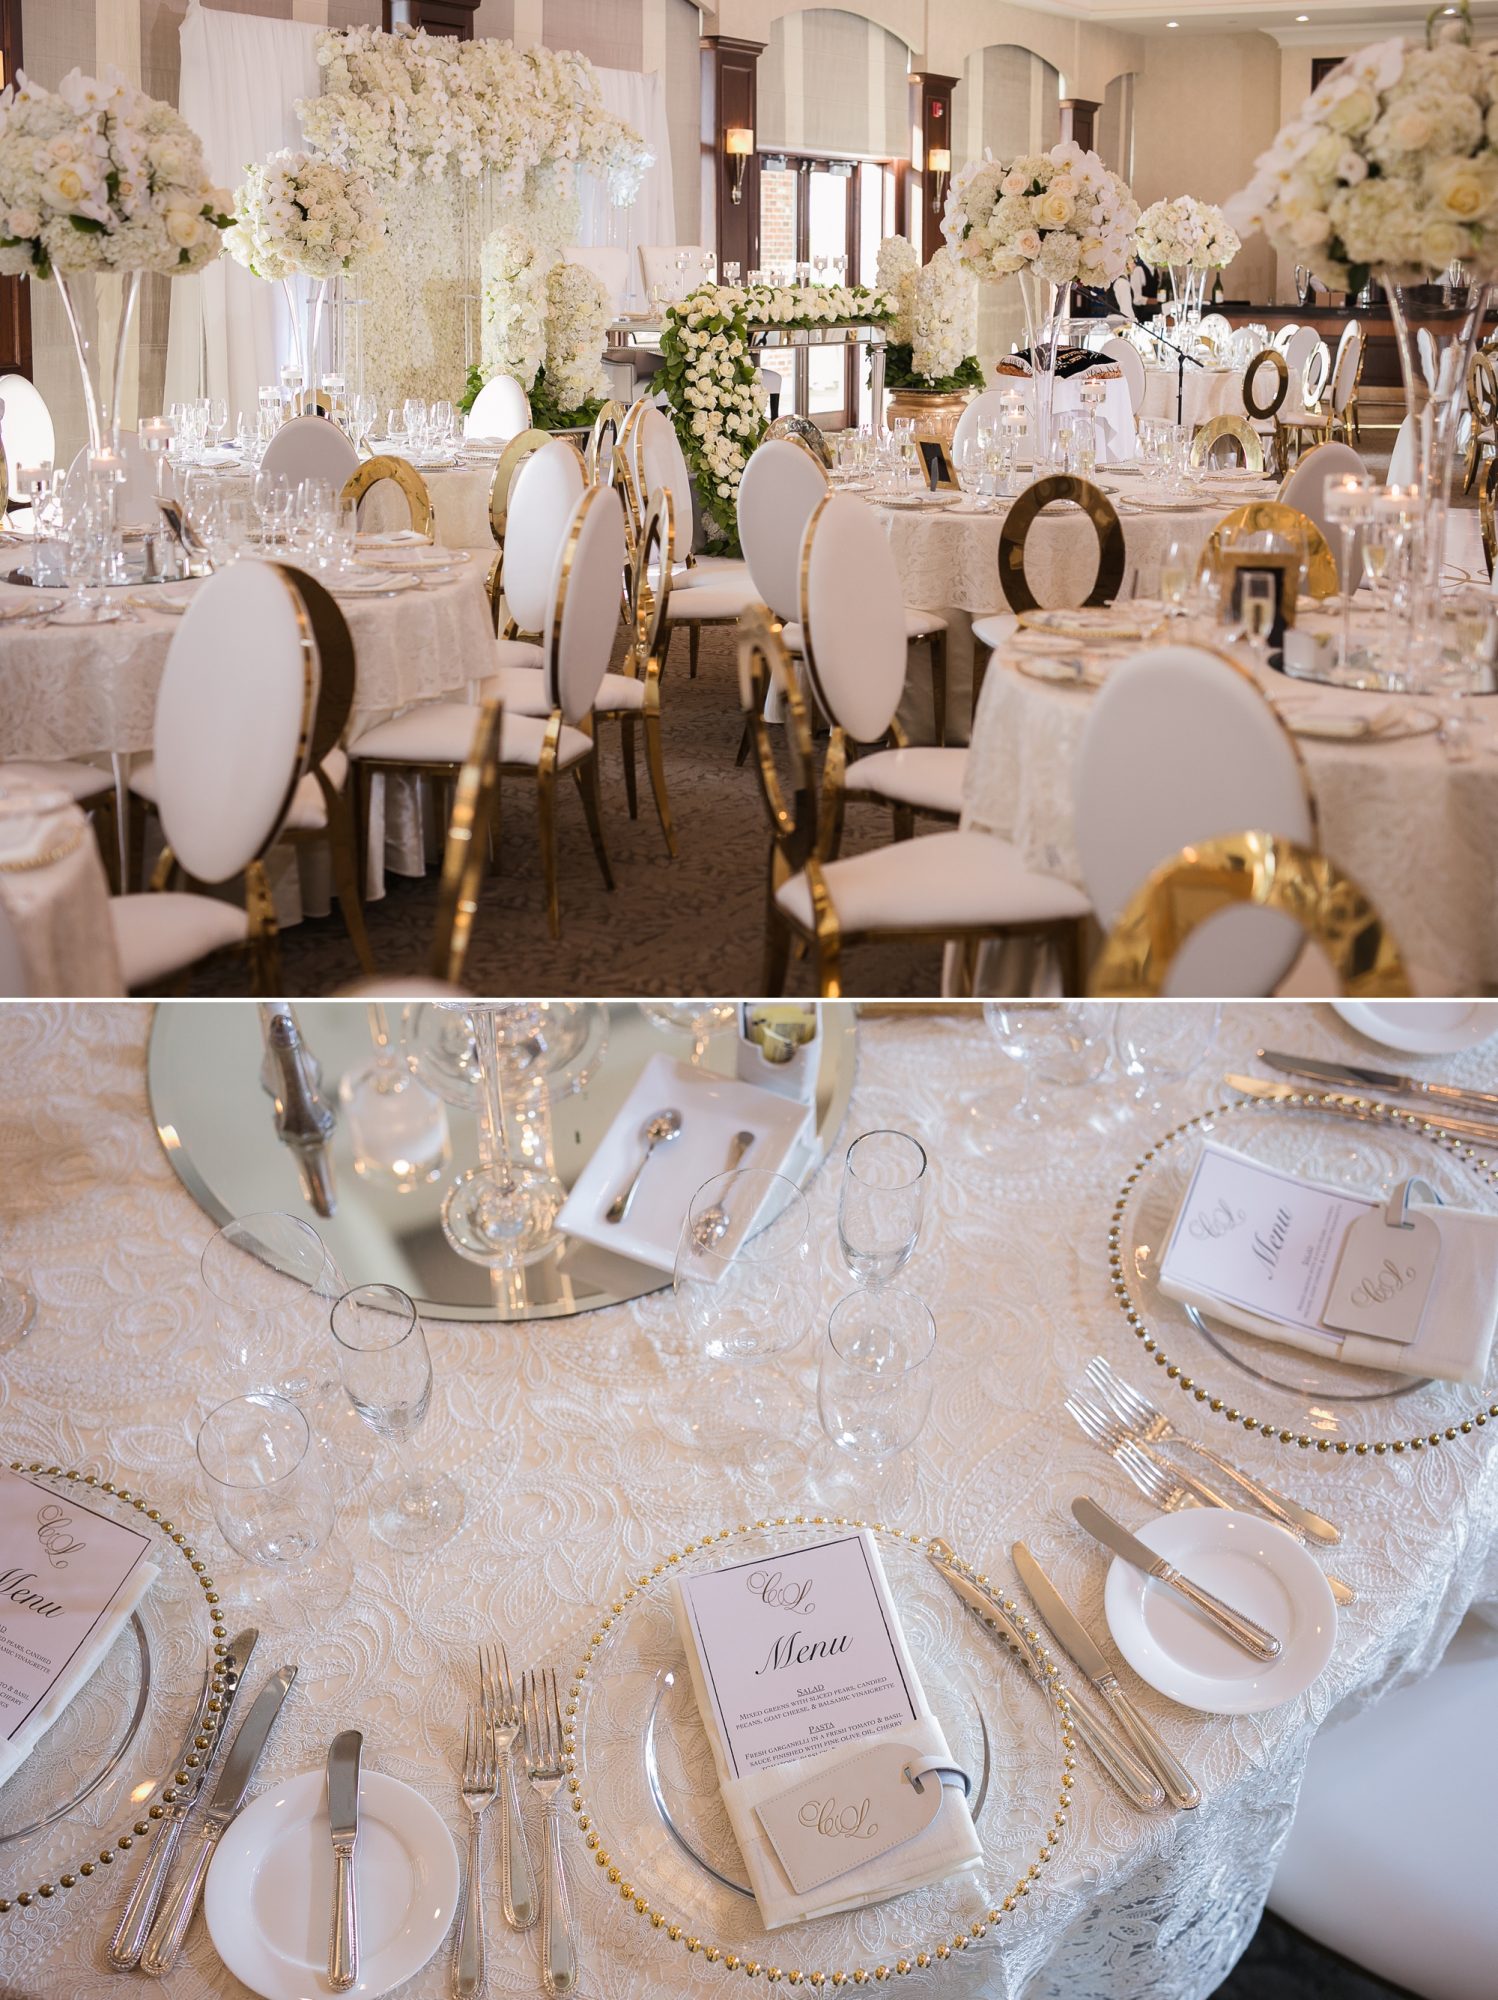 details of table decorations and venue